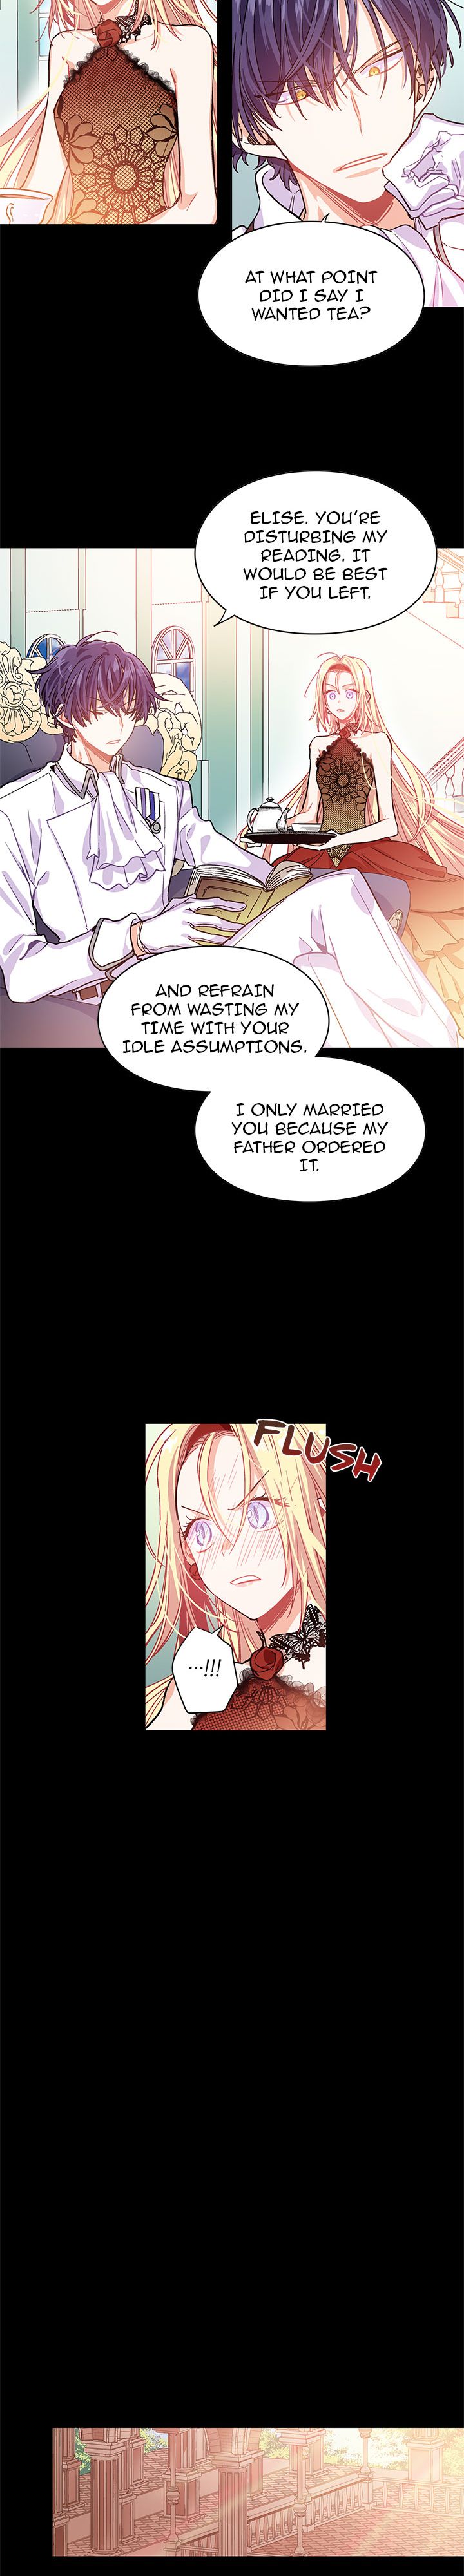 Doctor Elise – The Royal Lady with the Lamp - Chapter 7 Page 5